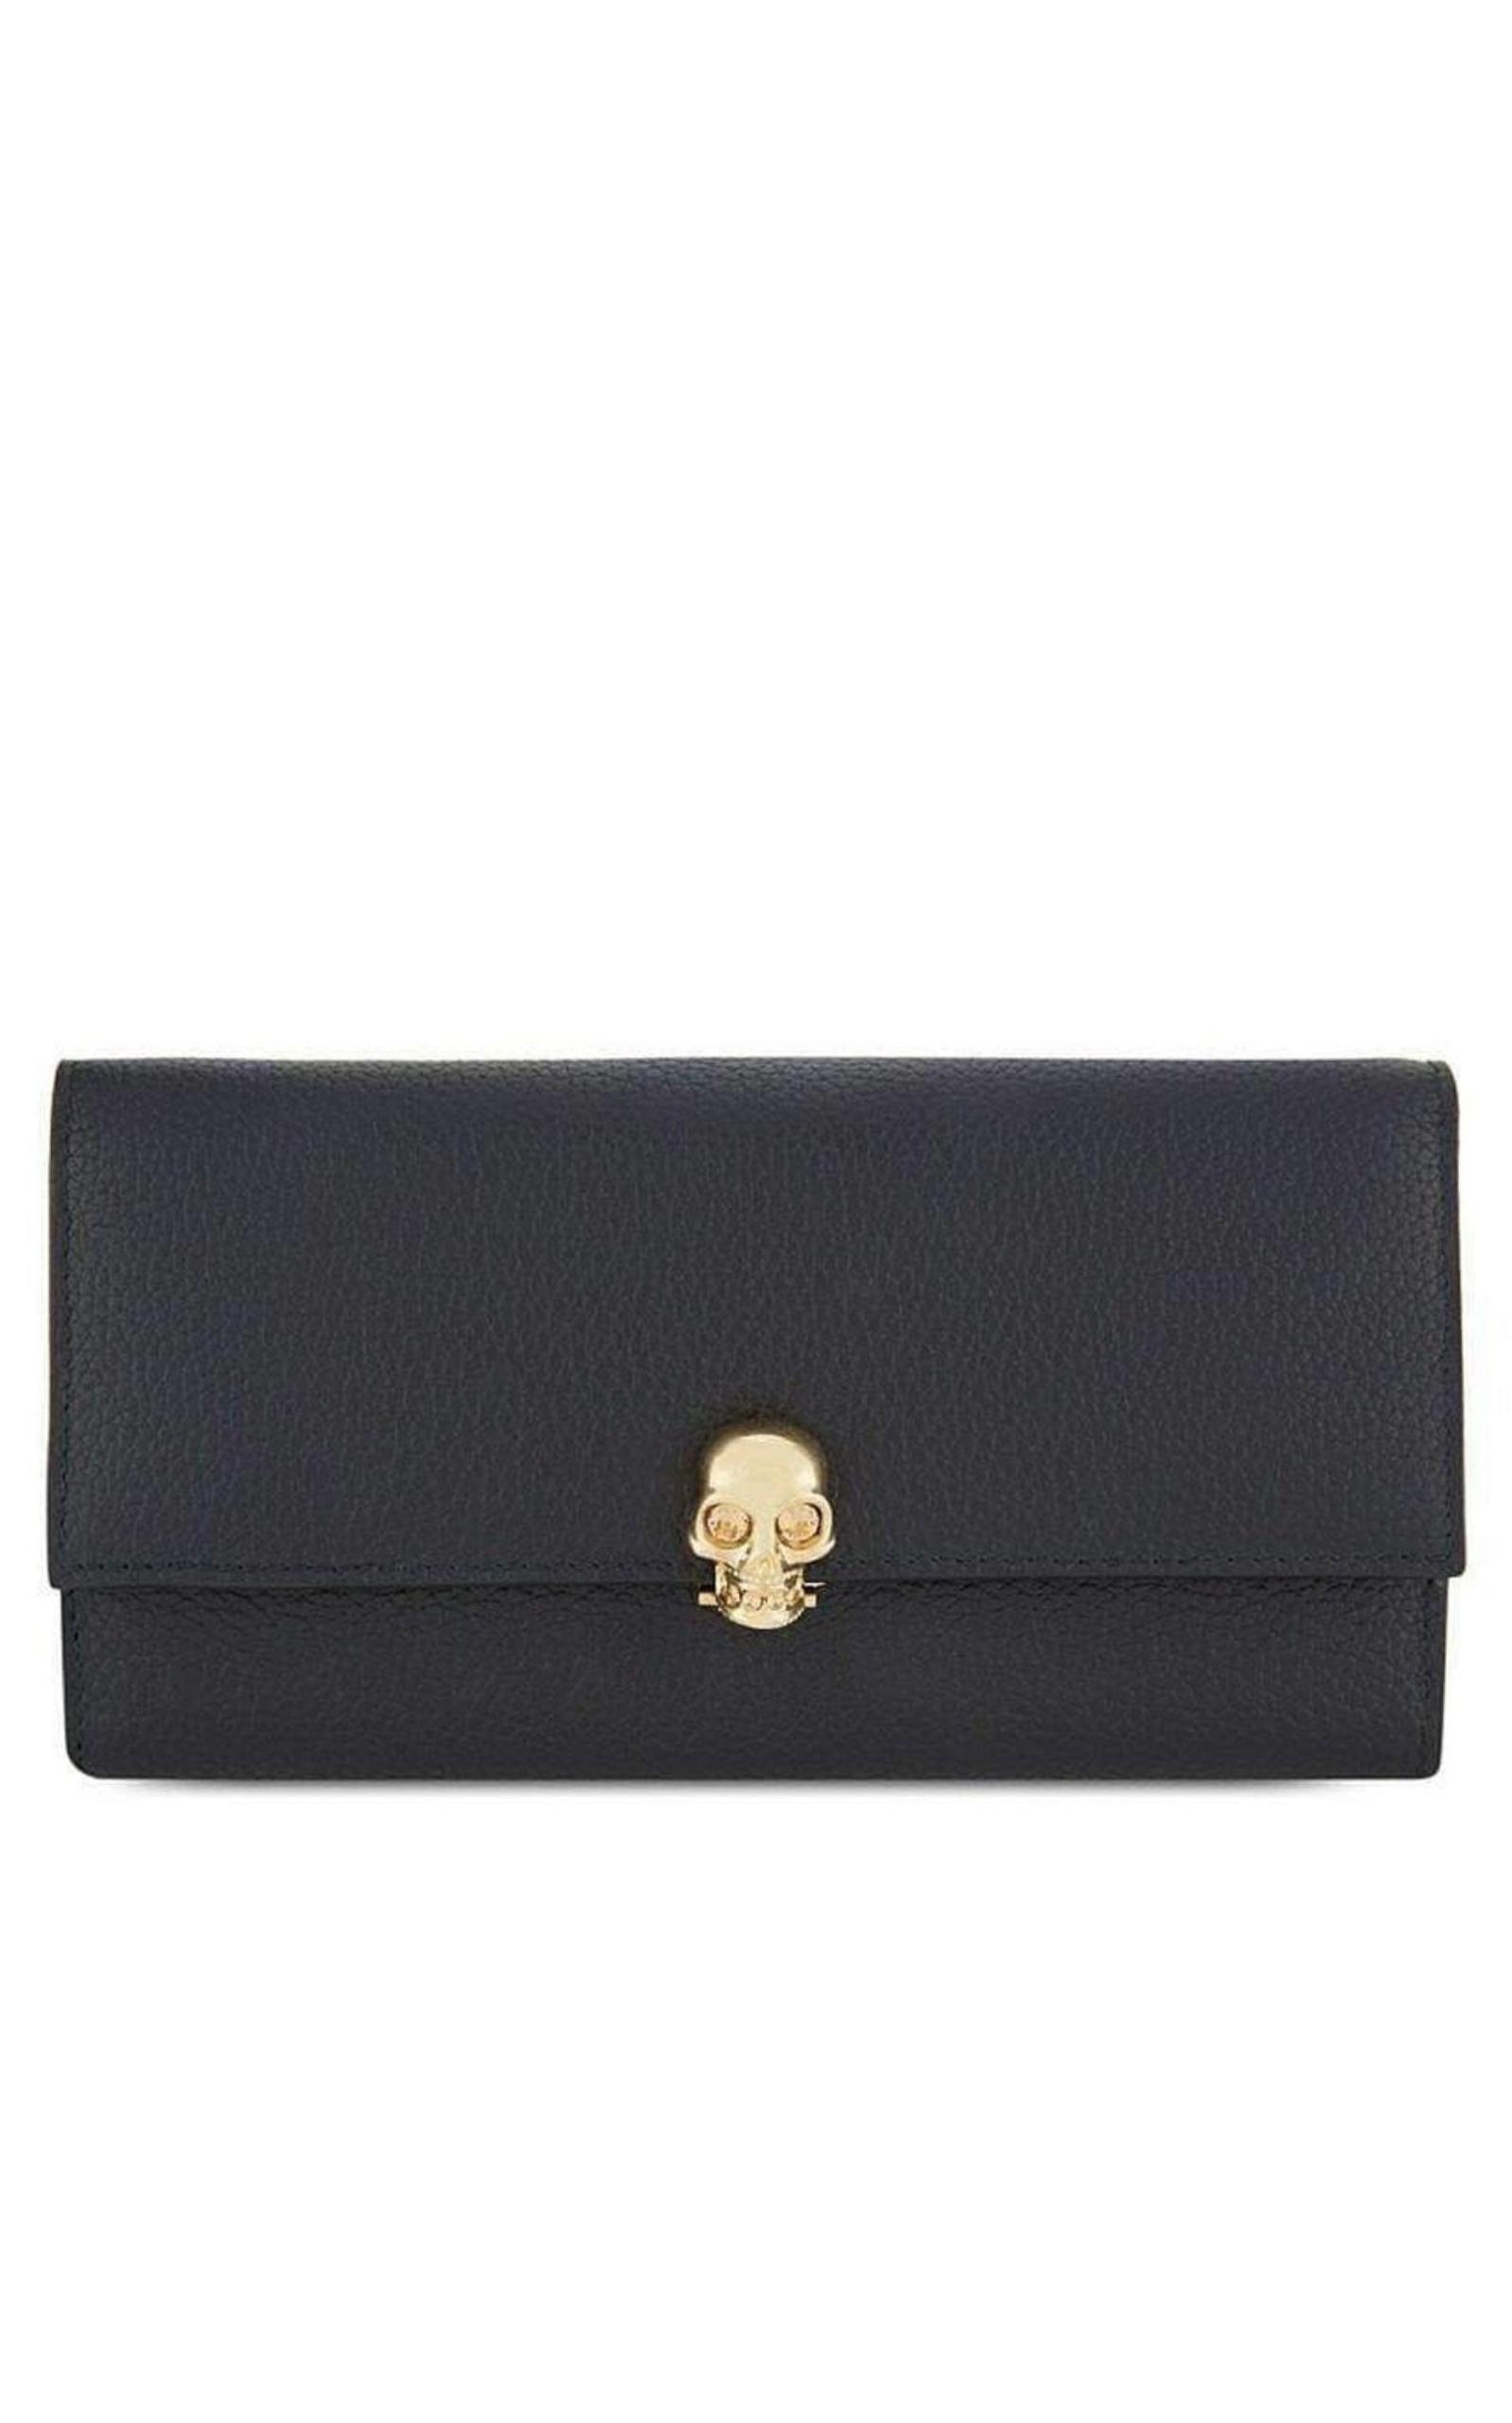  Alexander McQueenContinental Scull Leather Wallet - Runway Catalog